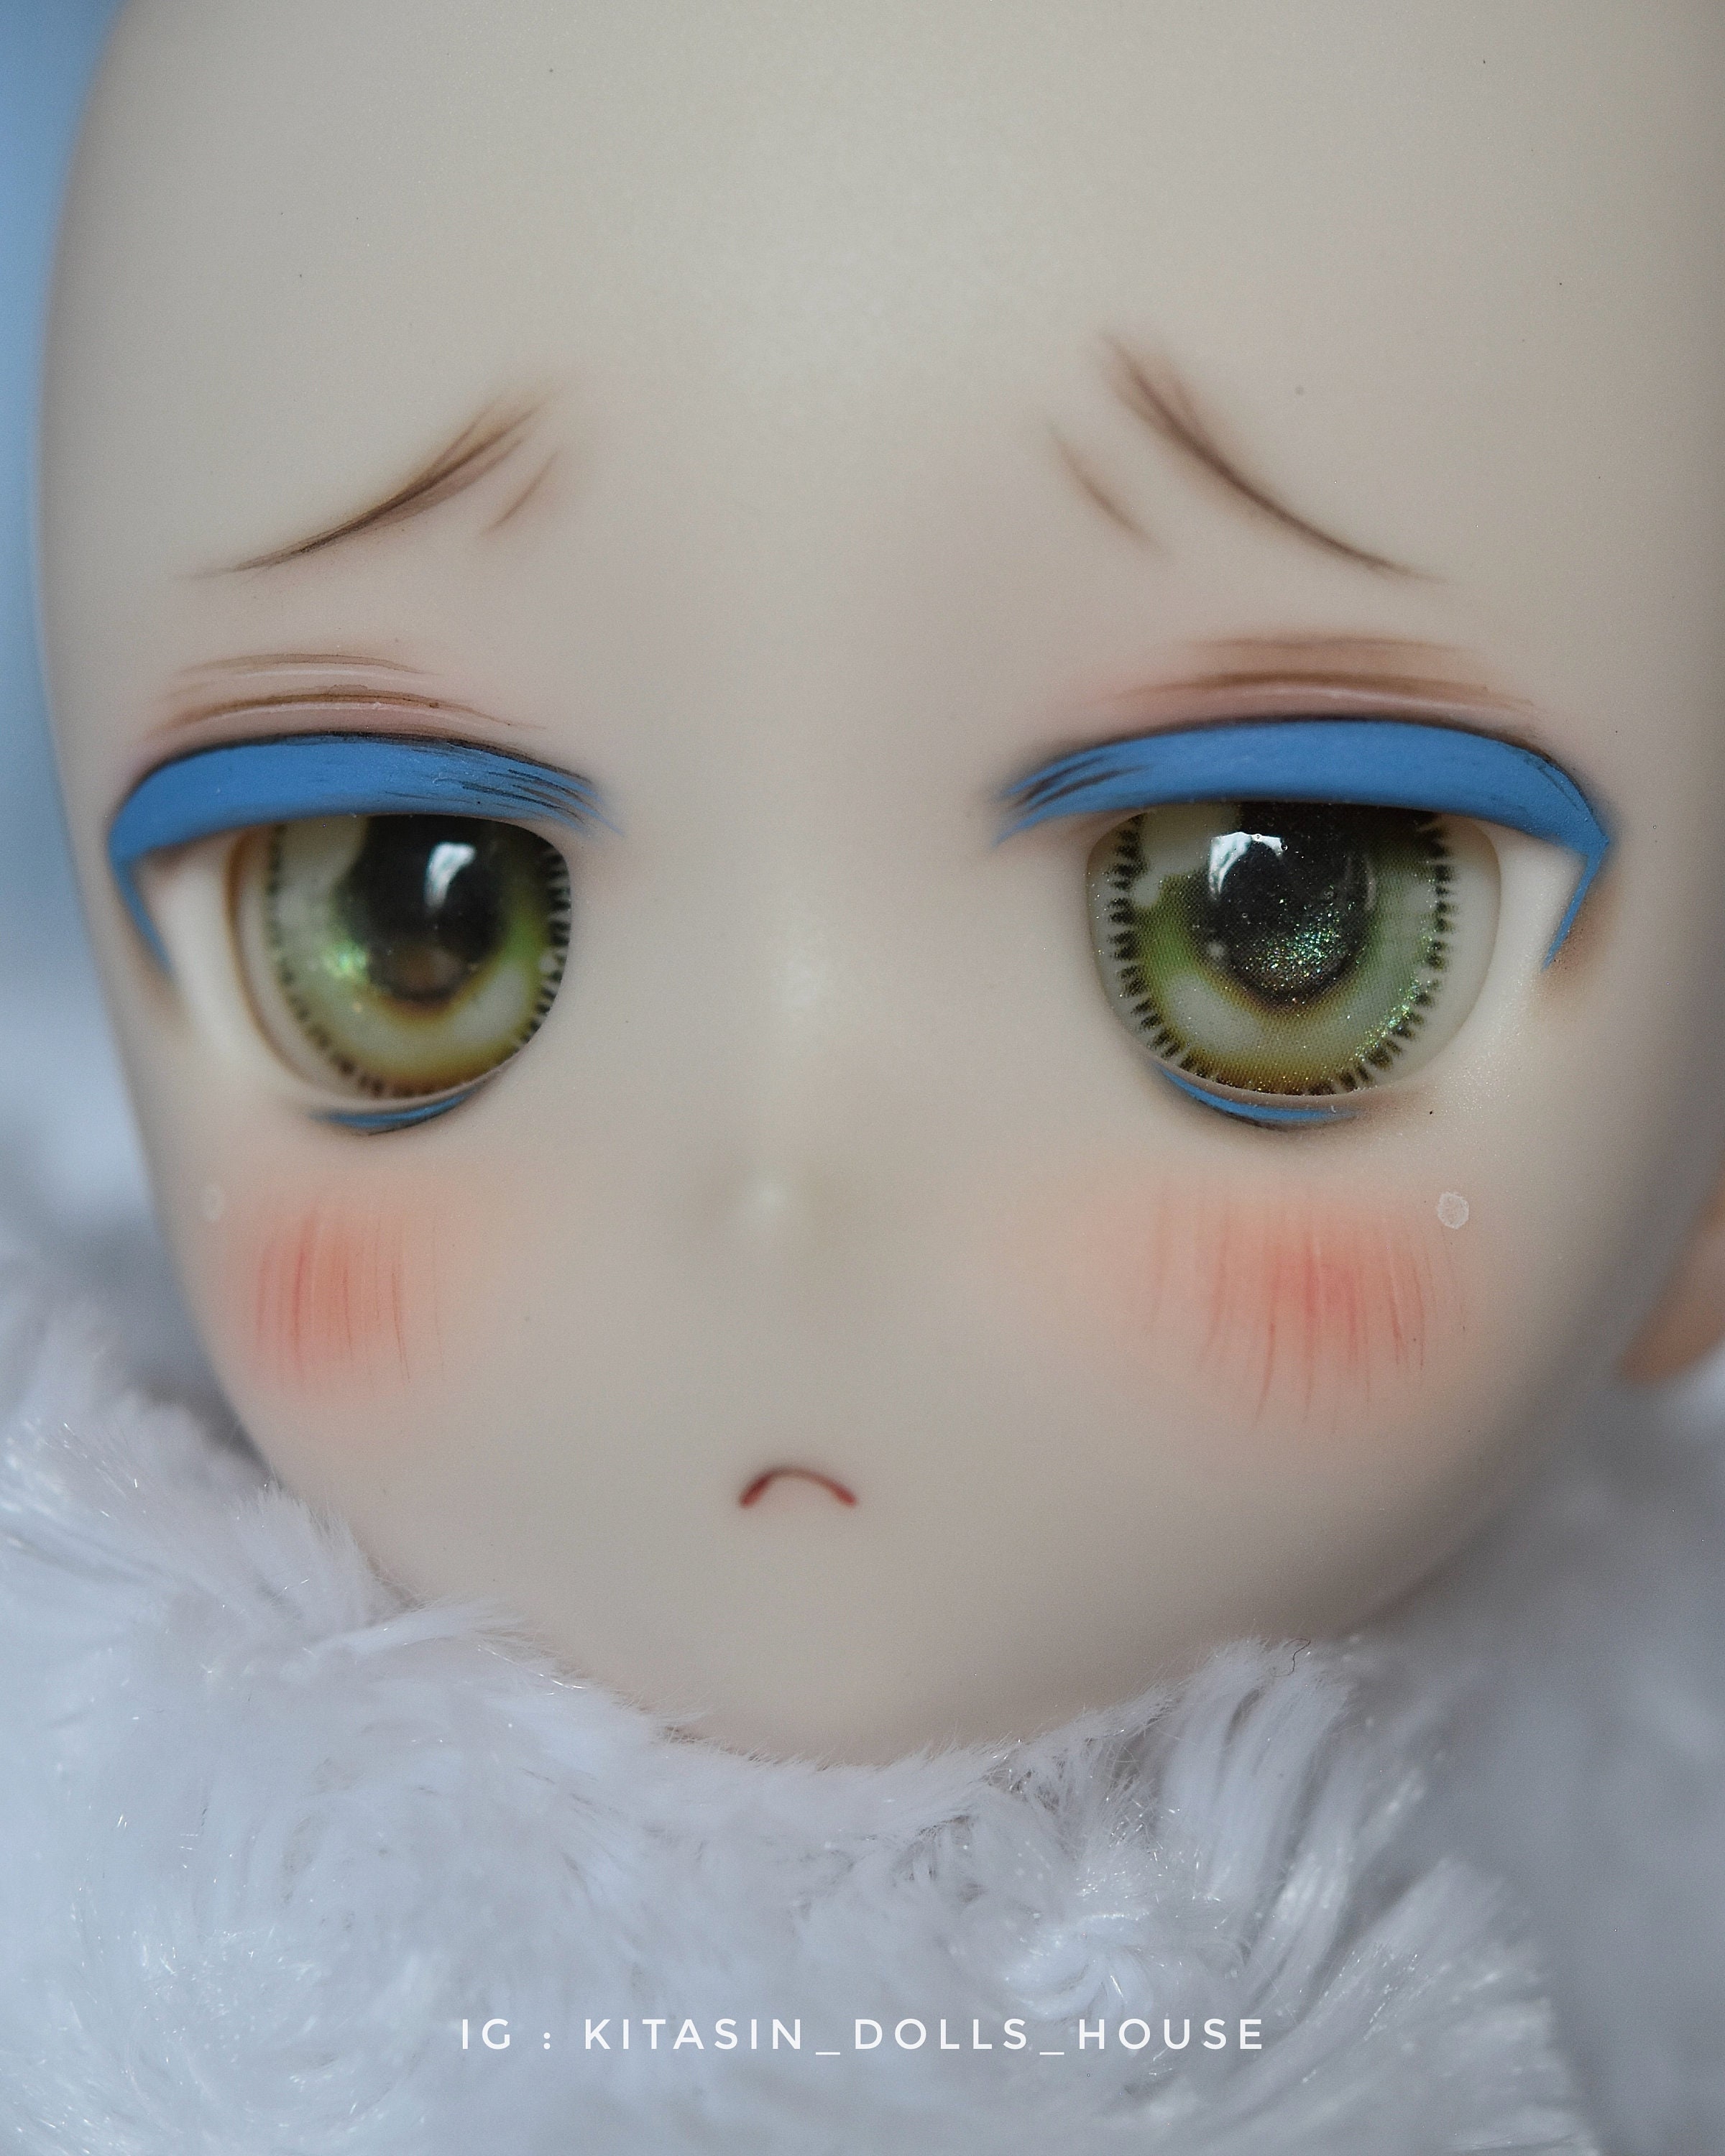 1/4 Doll's Head Part Imomodoll White /Tan Skin Without Makeup Miko Rucy  Accessories - AliExpress